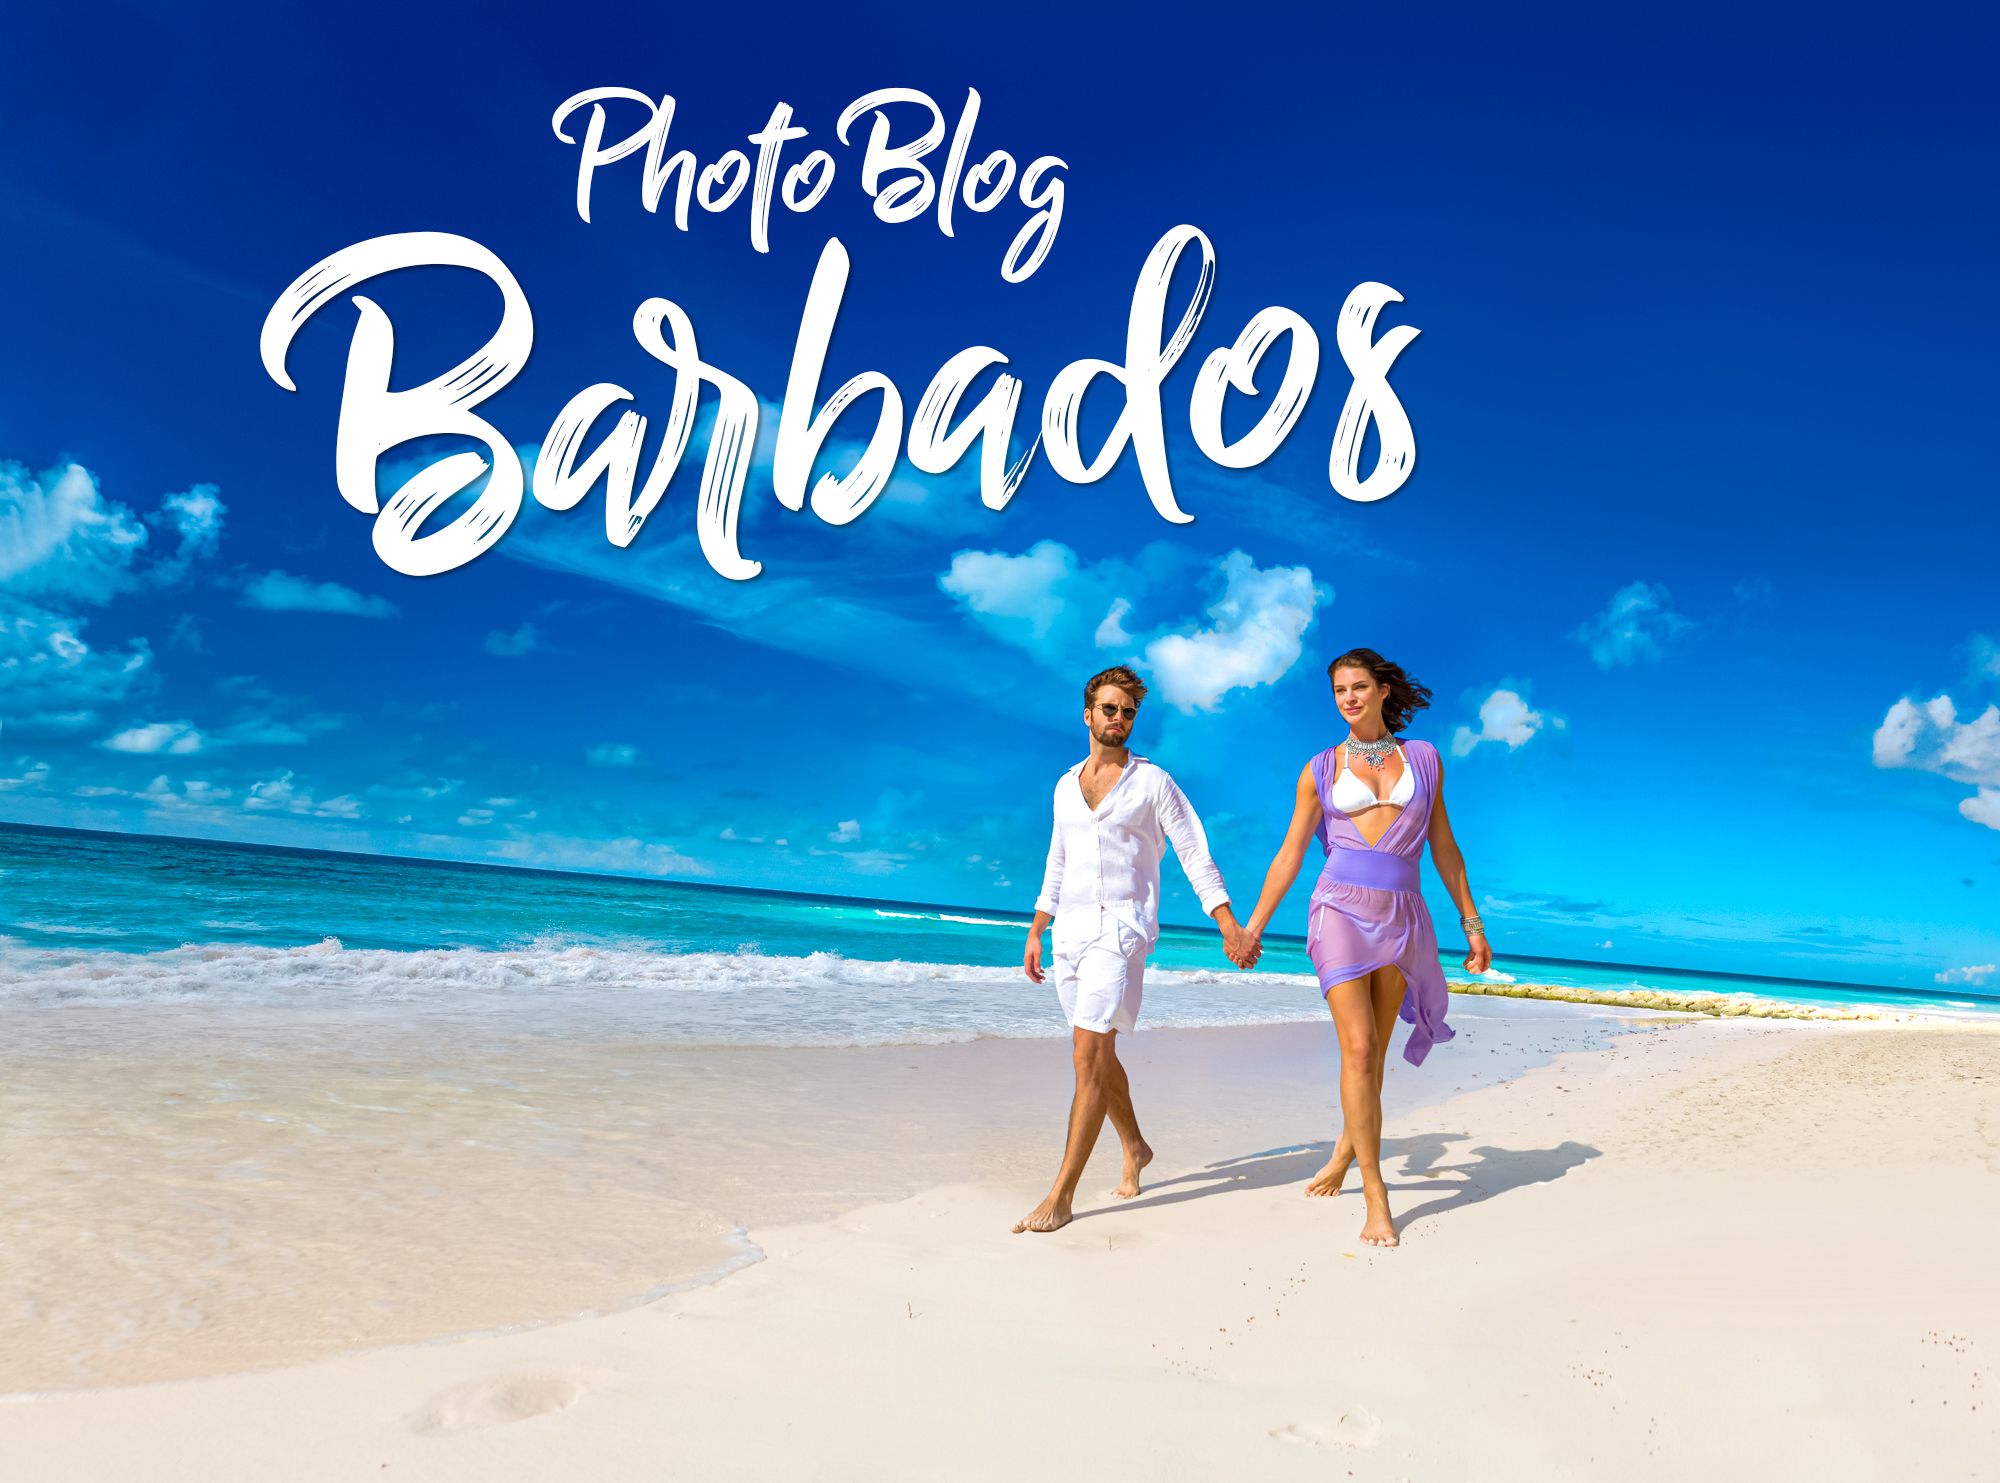 38 Pictures That Will Make You Fall In Love With Barbados